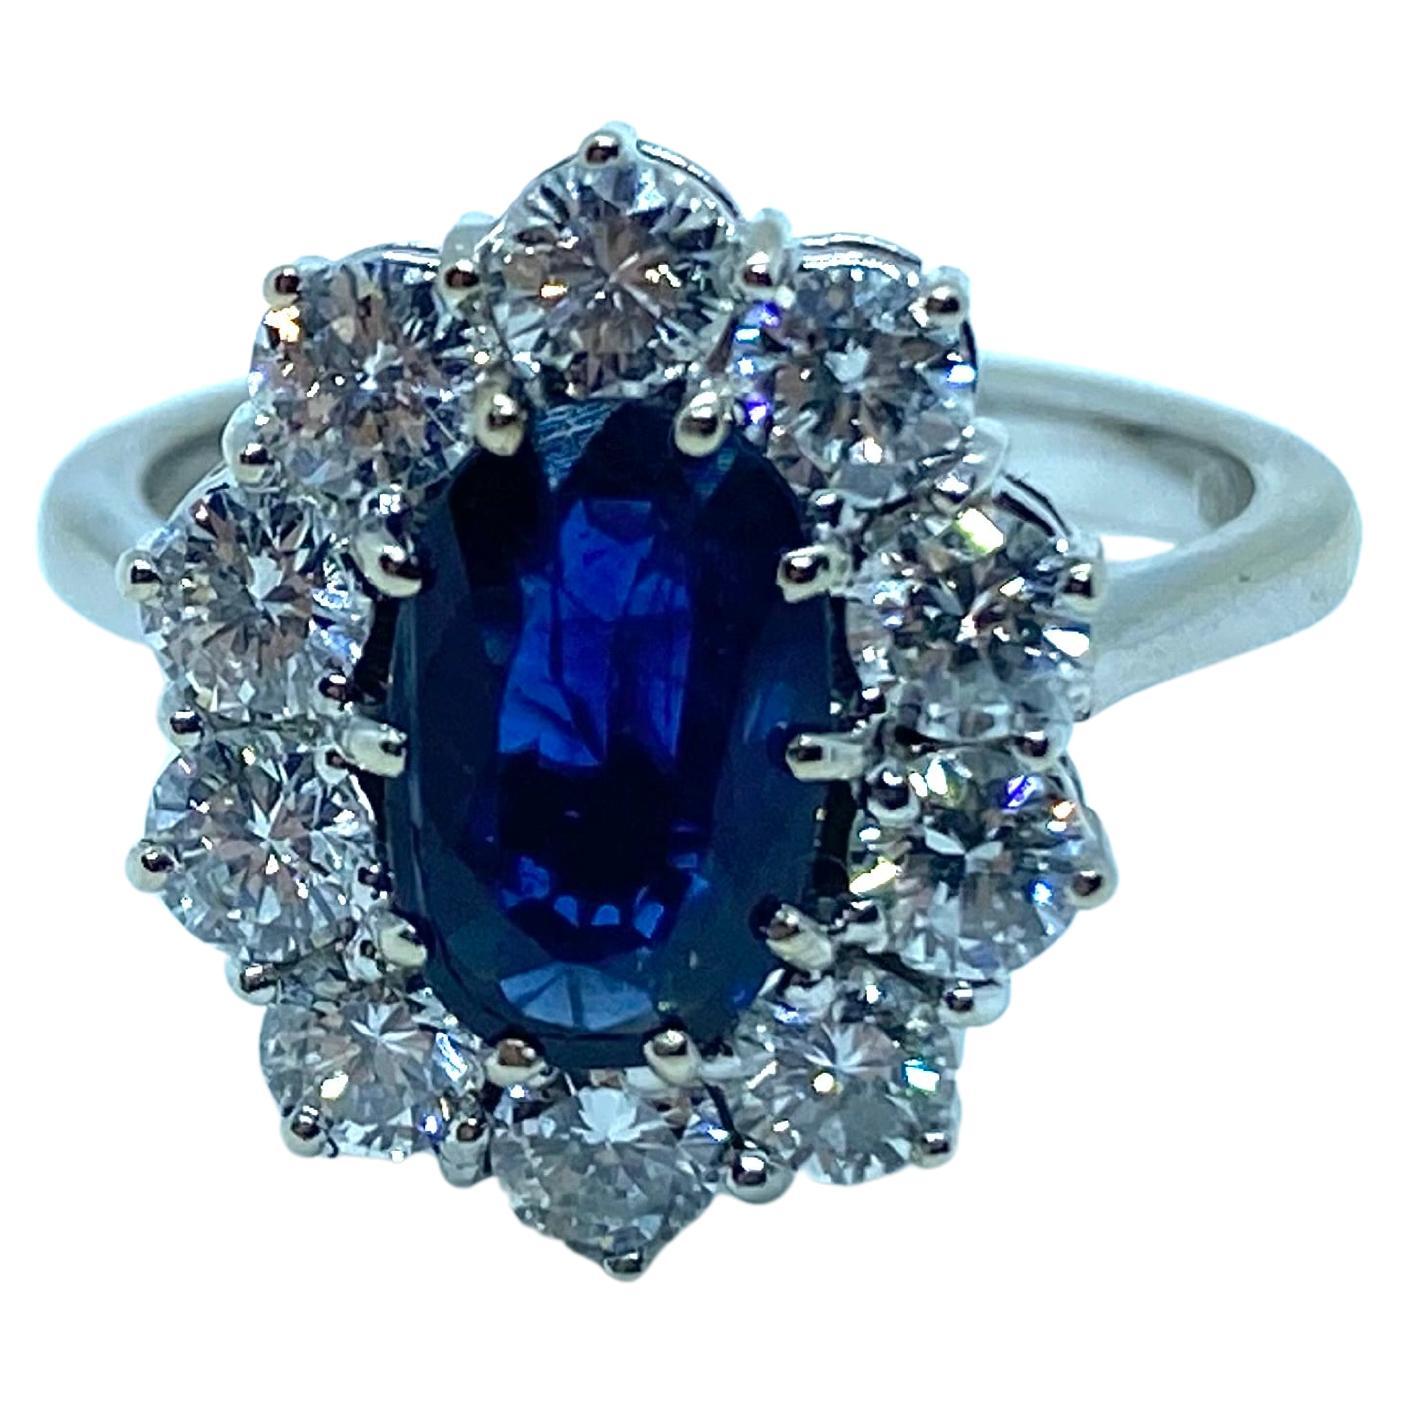 18K white gold ring
A big central sapphire, turquoise blue, weighing 2,5 ct.
Oustanding on a circle of 10 brilliant cut diamonds (total weight 1,15 ct.).
Italian production of the second half of the 20th century